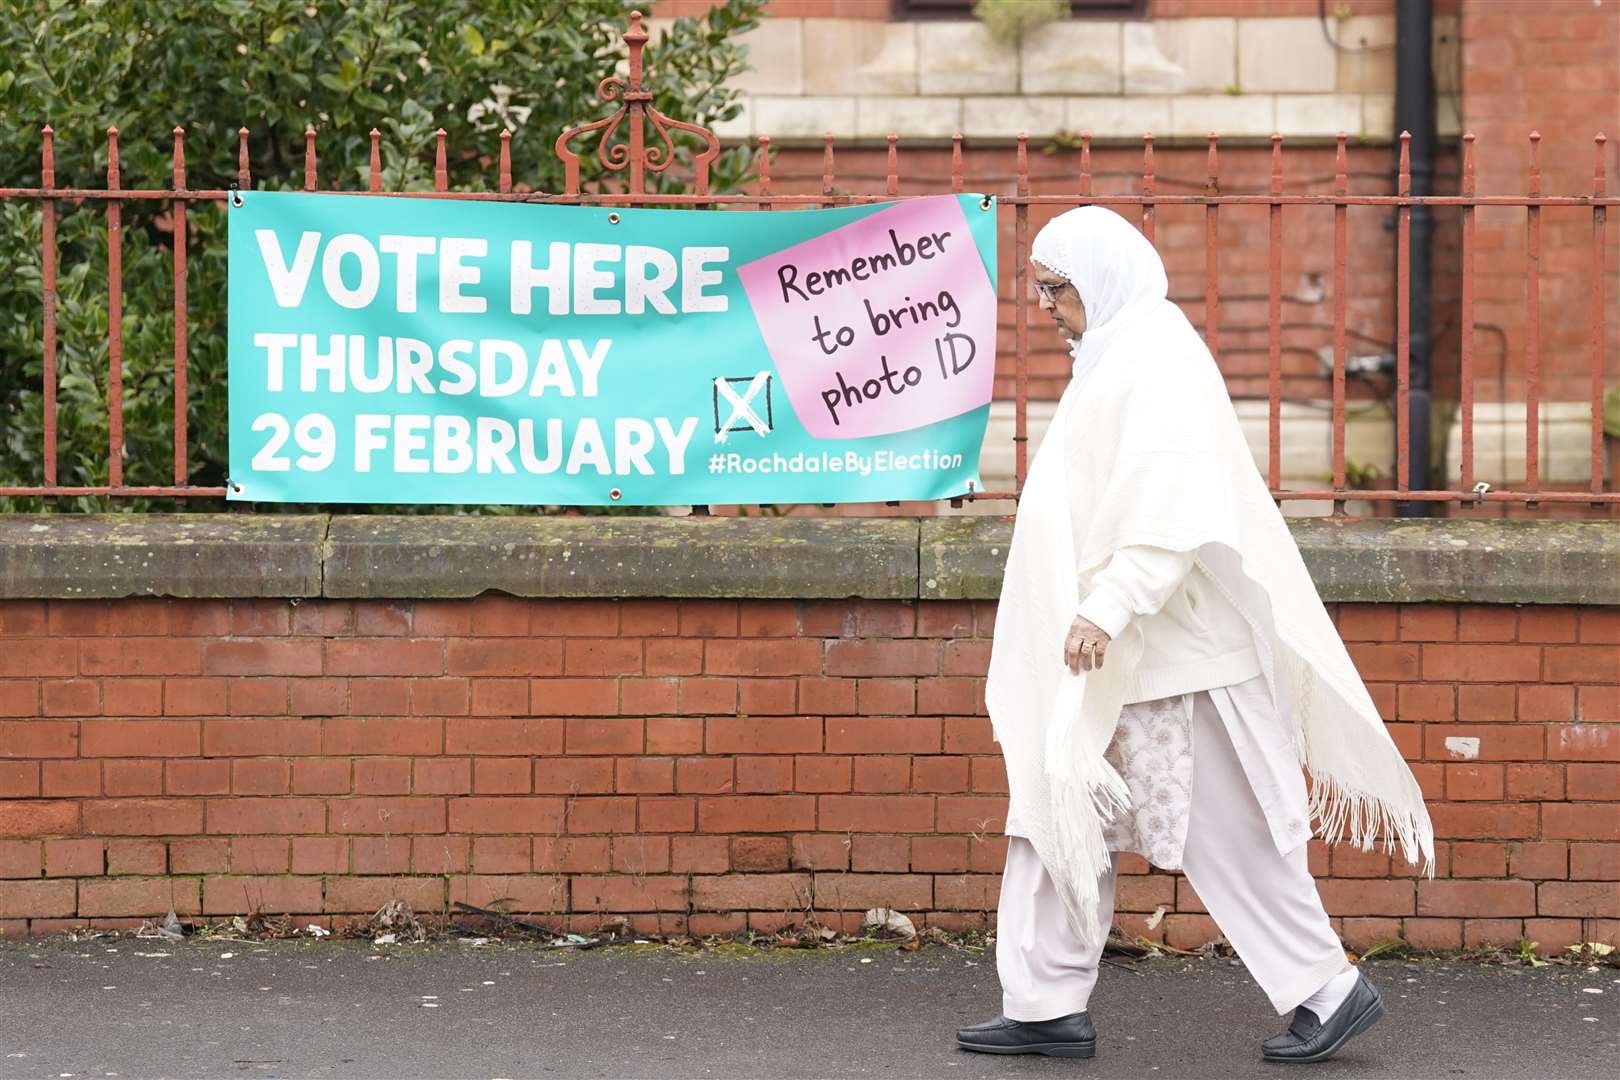 A woman walks past a sign for a polling station location in Rochdale, Greater Manchester, ahead of the by-election (Danny Lawson/PA)